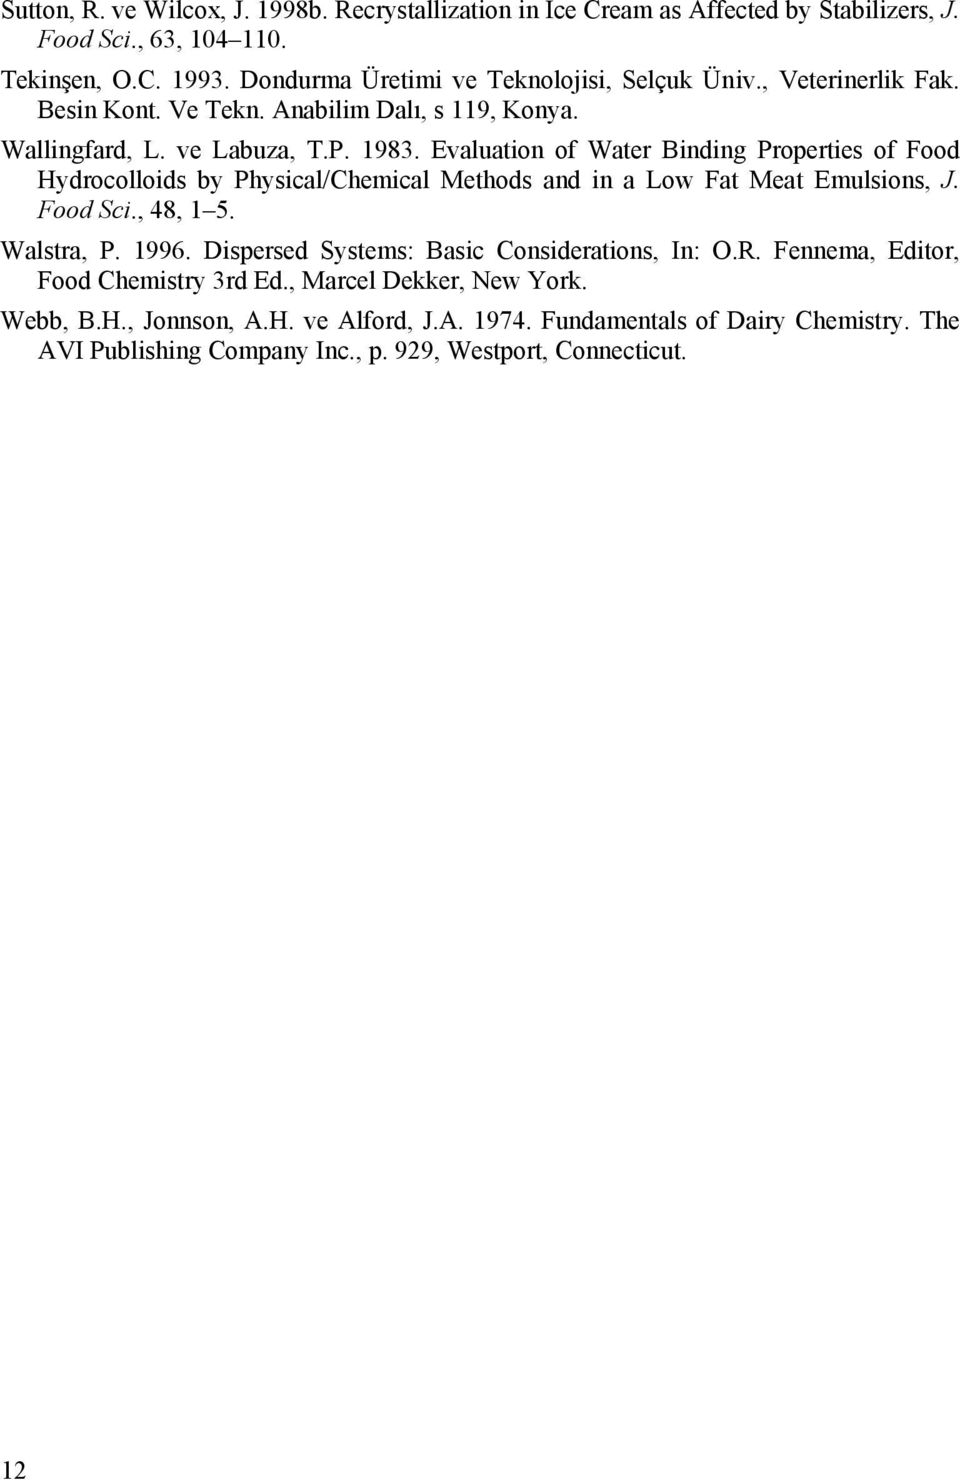 Evaluation of Water Binding Properties of Food Hydrocolloids by Physical/Chemical Methods and in a Low Fat Meat Emulsions, J. Food Sci., 48, 1 5. Walstra, P. 1996.